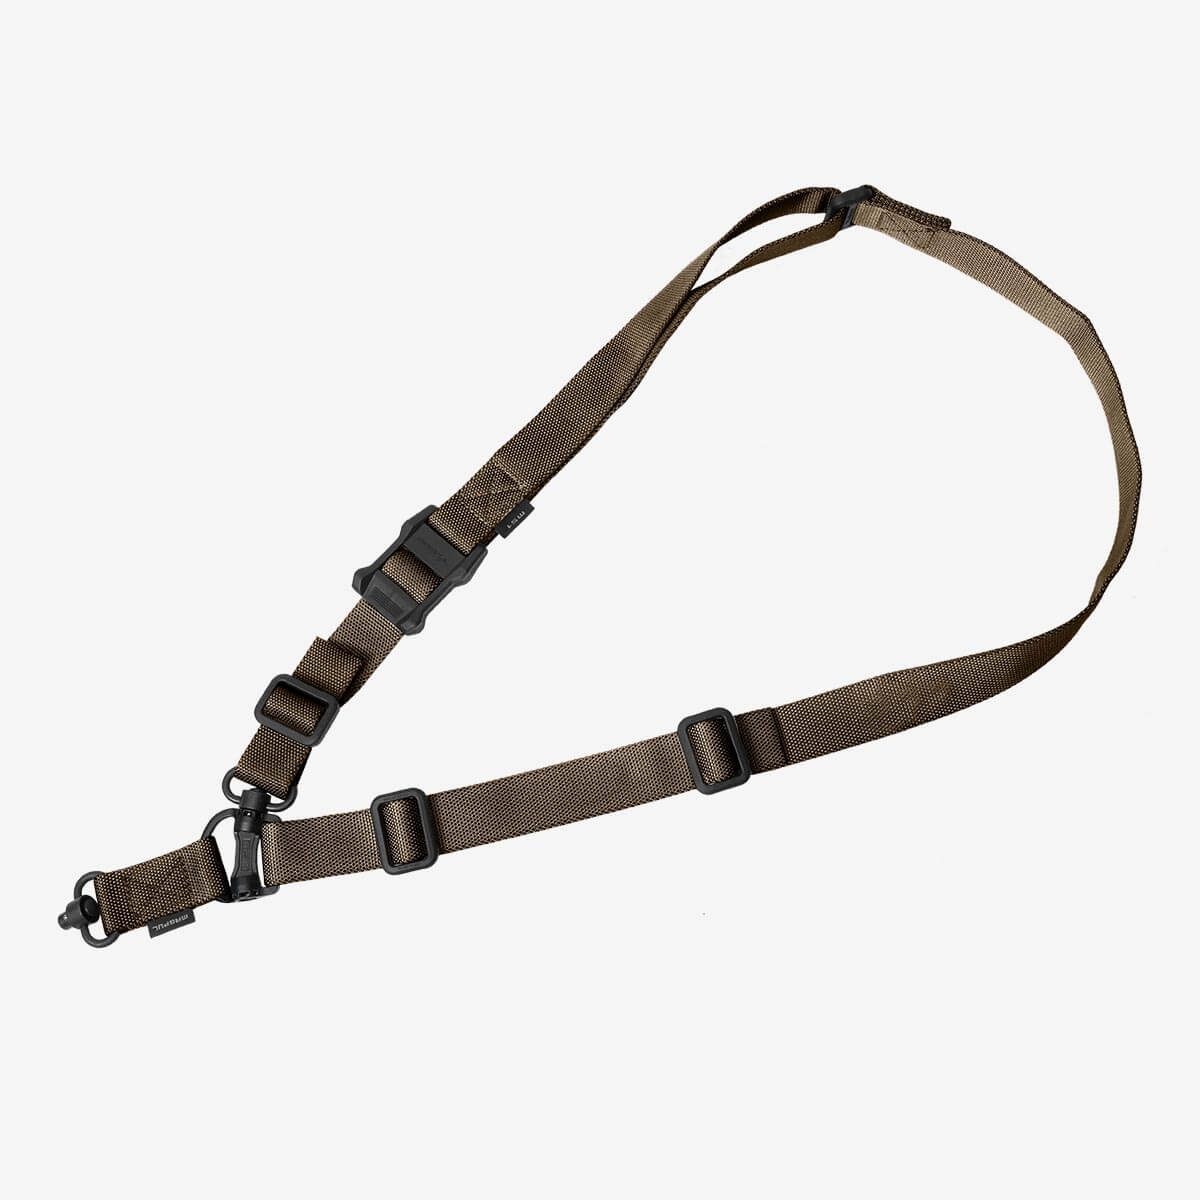 MS4™ Dual QD Multi Mission Sling System Coyote